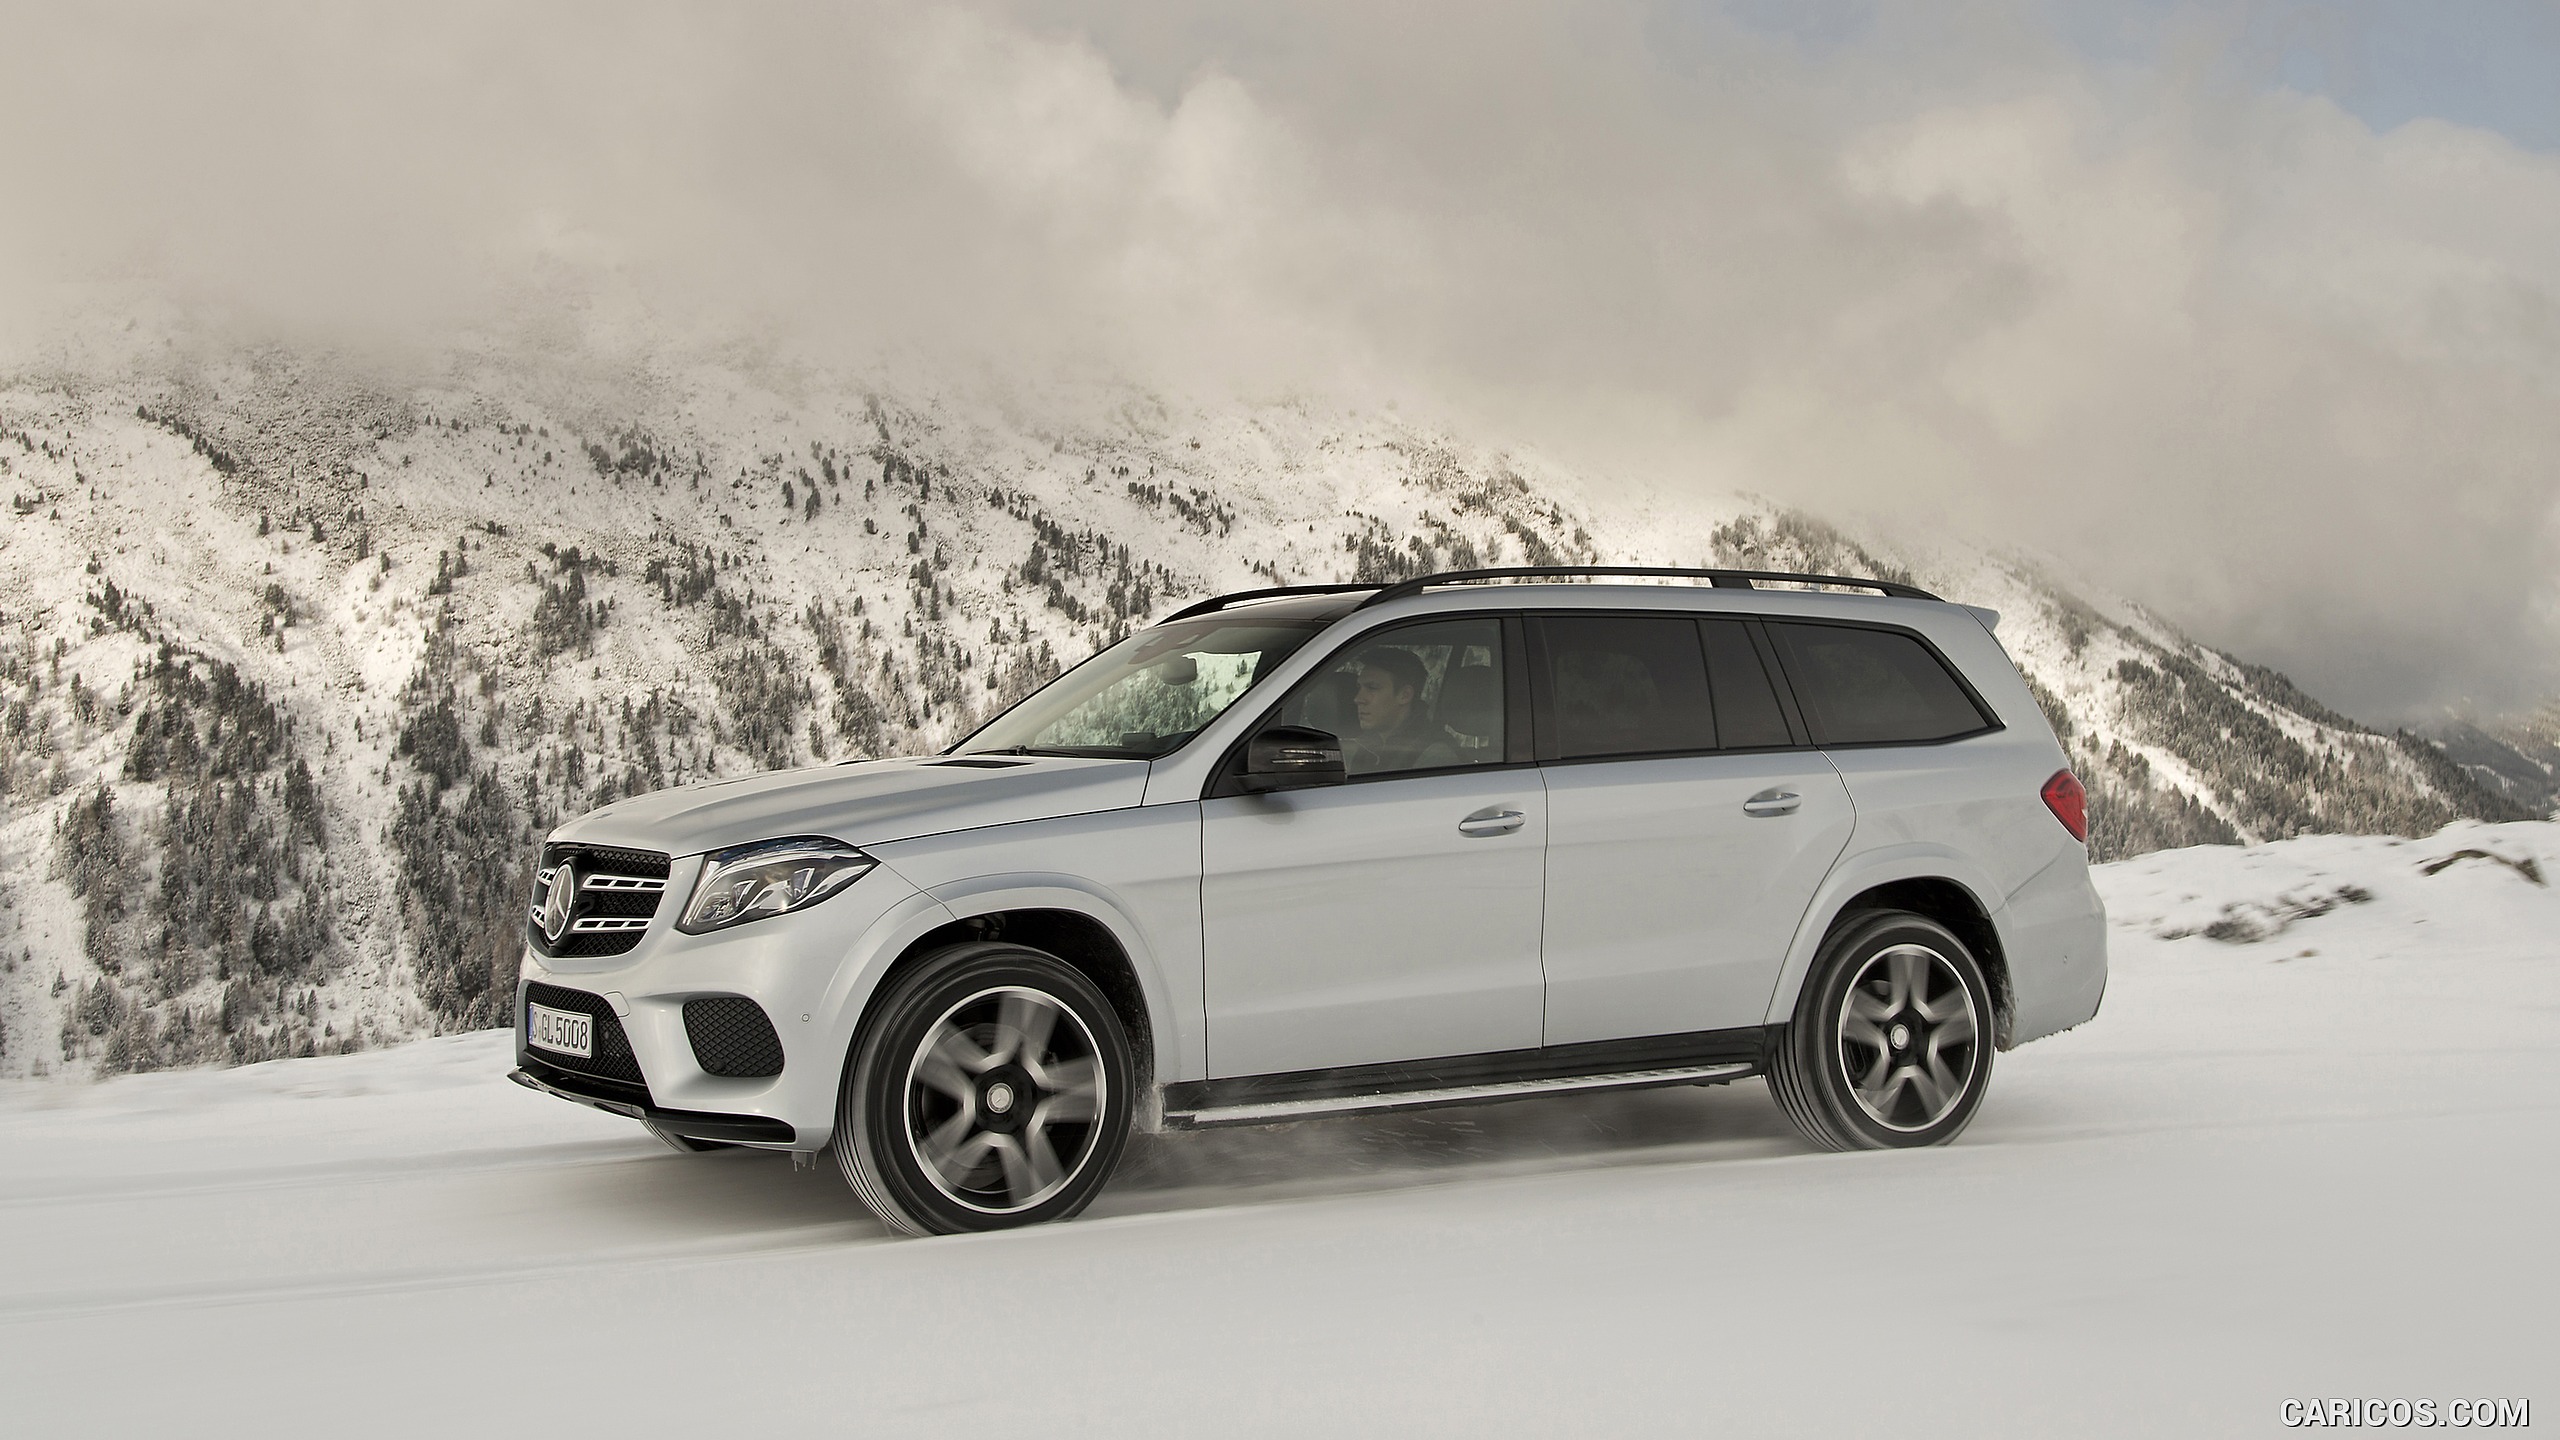 2017 Mercedes-Benz GLS 500 4MATIC AMG Line in Snow - Side, #129 of 255